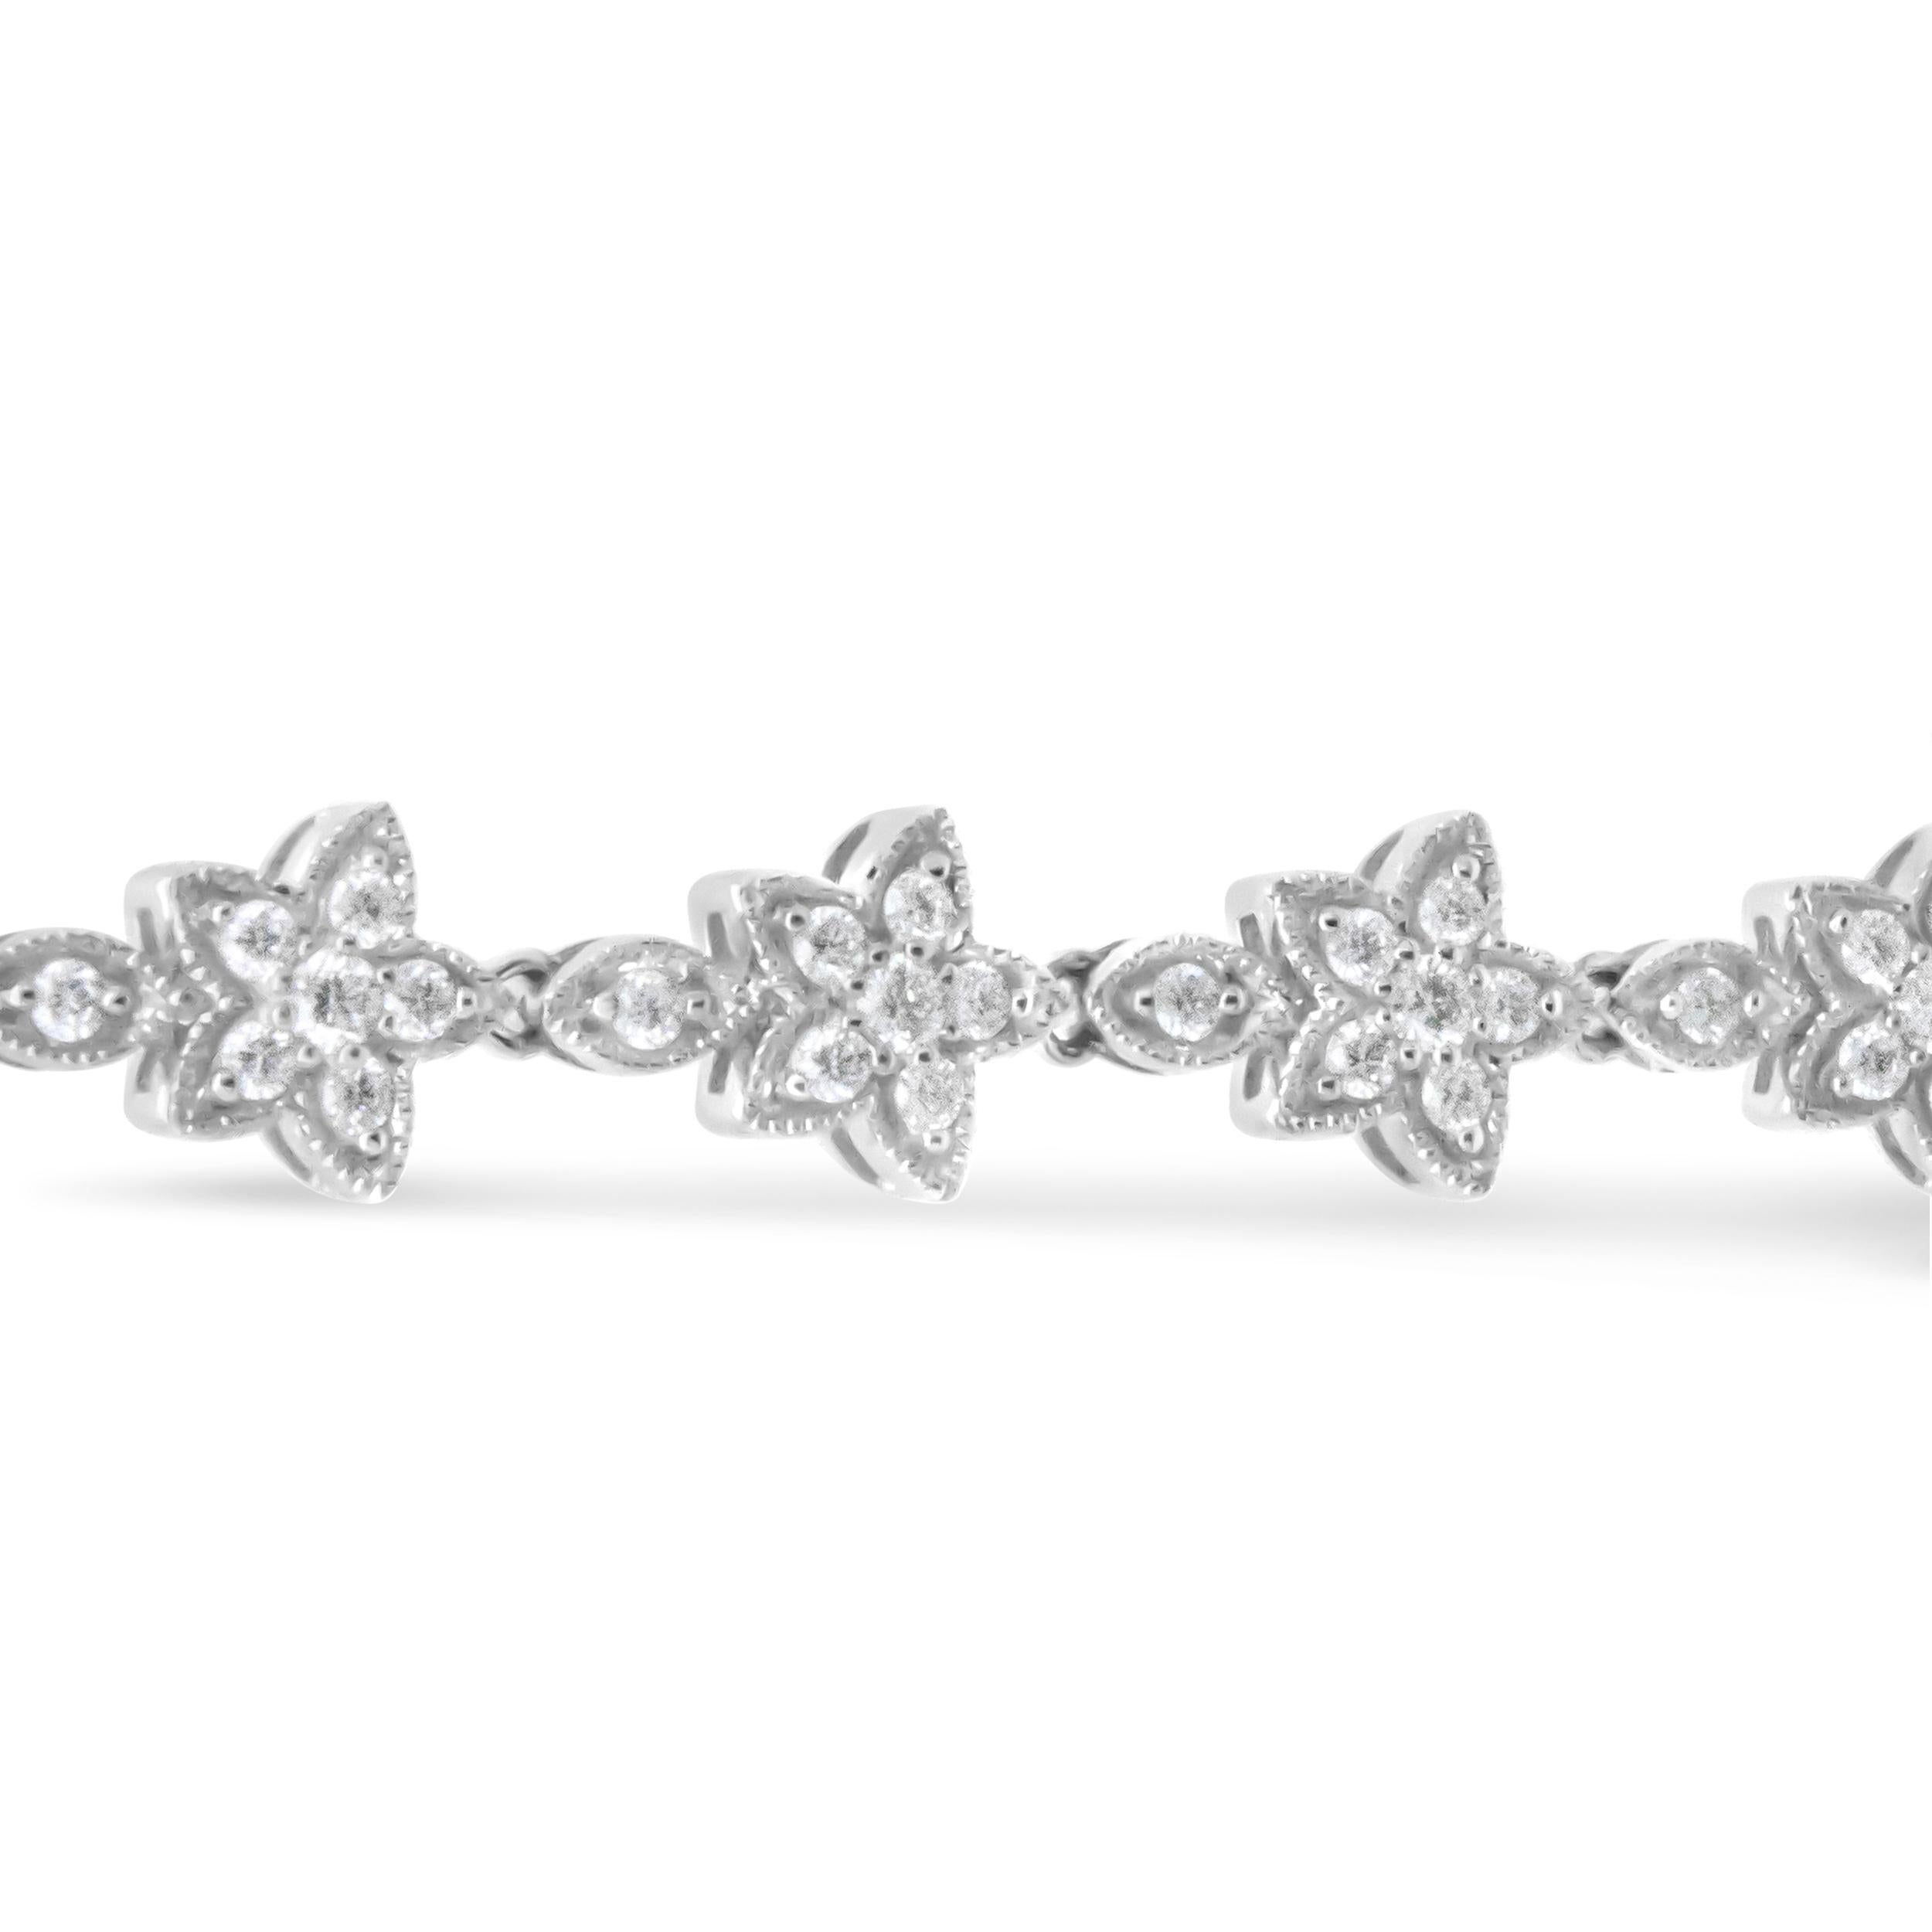 14K White Gold 1 1/5 Carat Round Diamond Flower Blossom Link Bracelet In New Condition For Sale In New York, NY